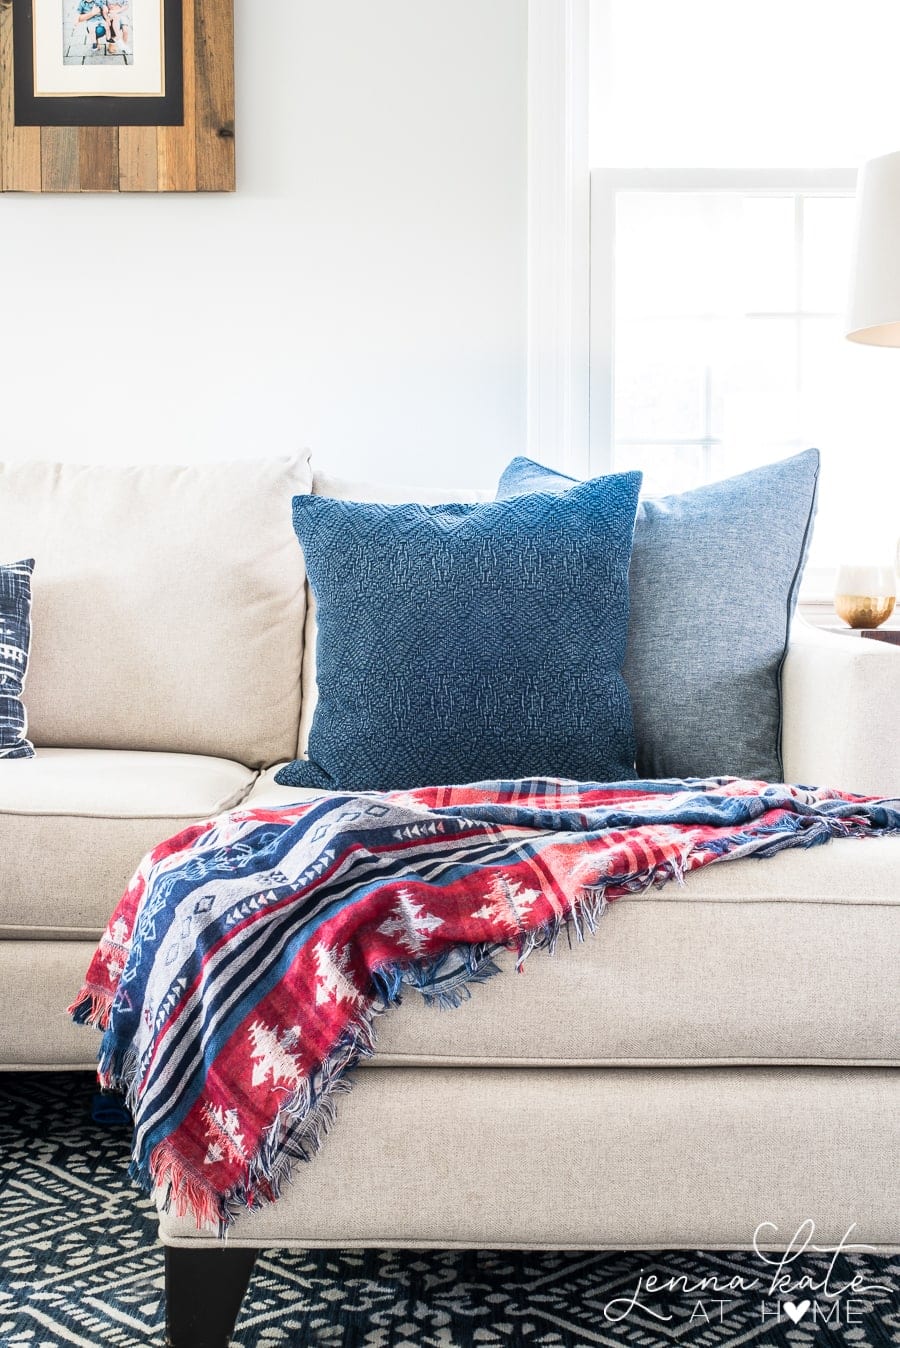 The end of a couch with a rustic blue and red throw and a pair of solid blue pillows